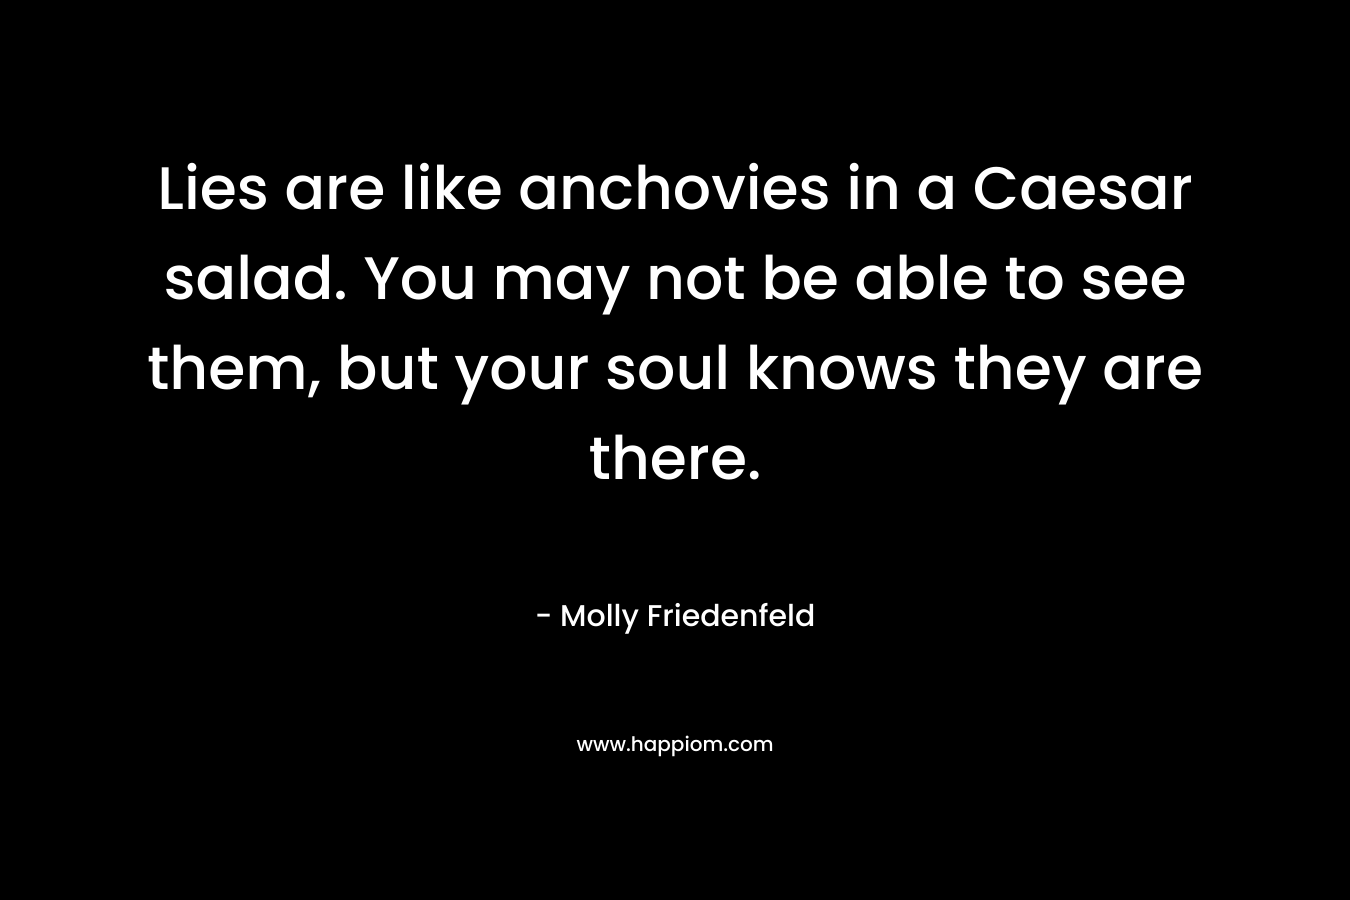 Lies are like anchovies in a Caesar salad. You may not be able to see them, but your soul knows they are there.